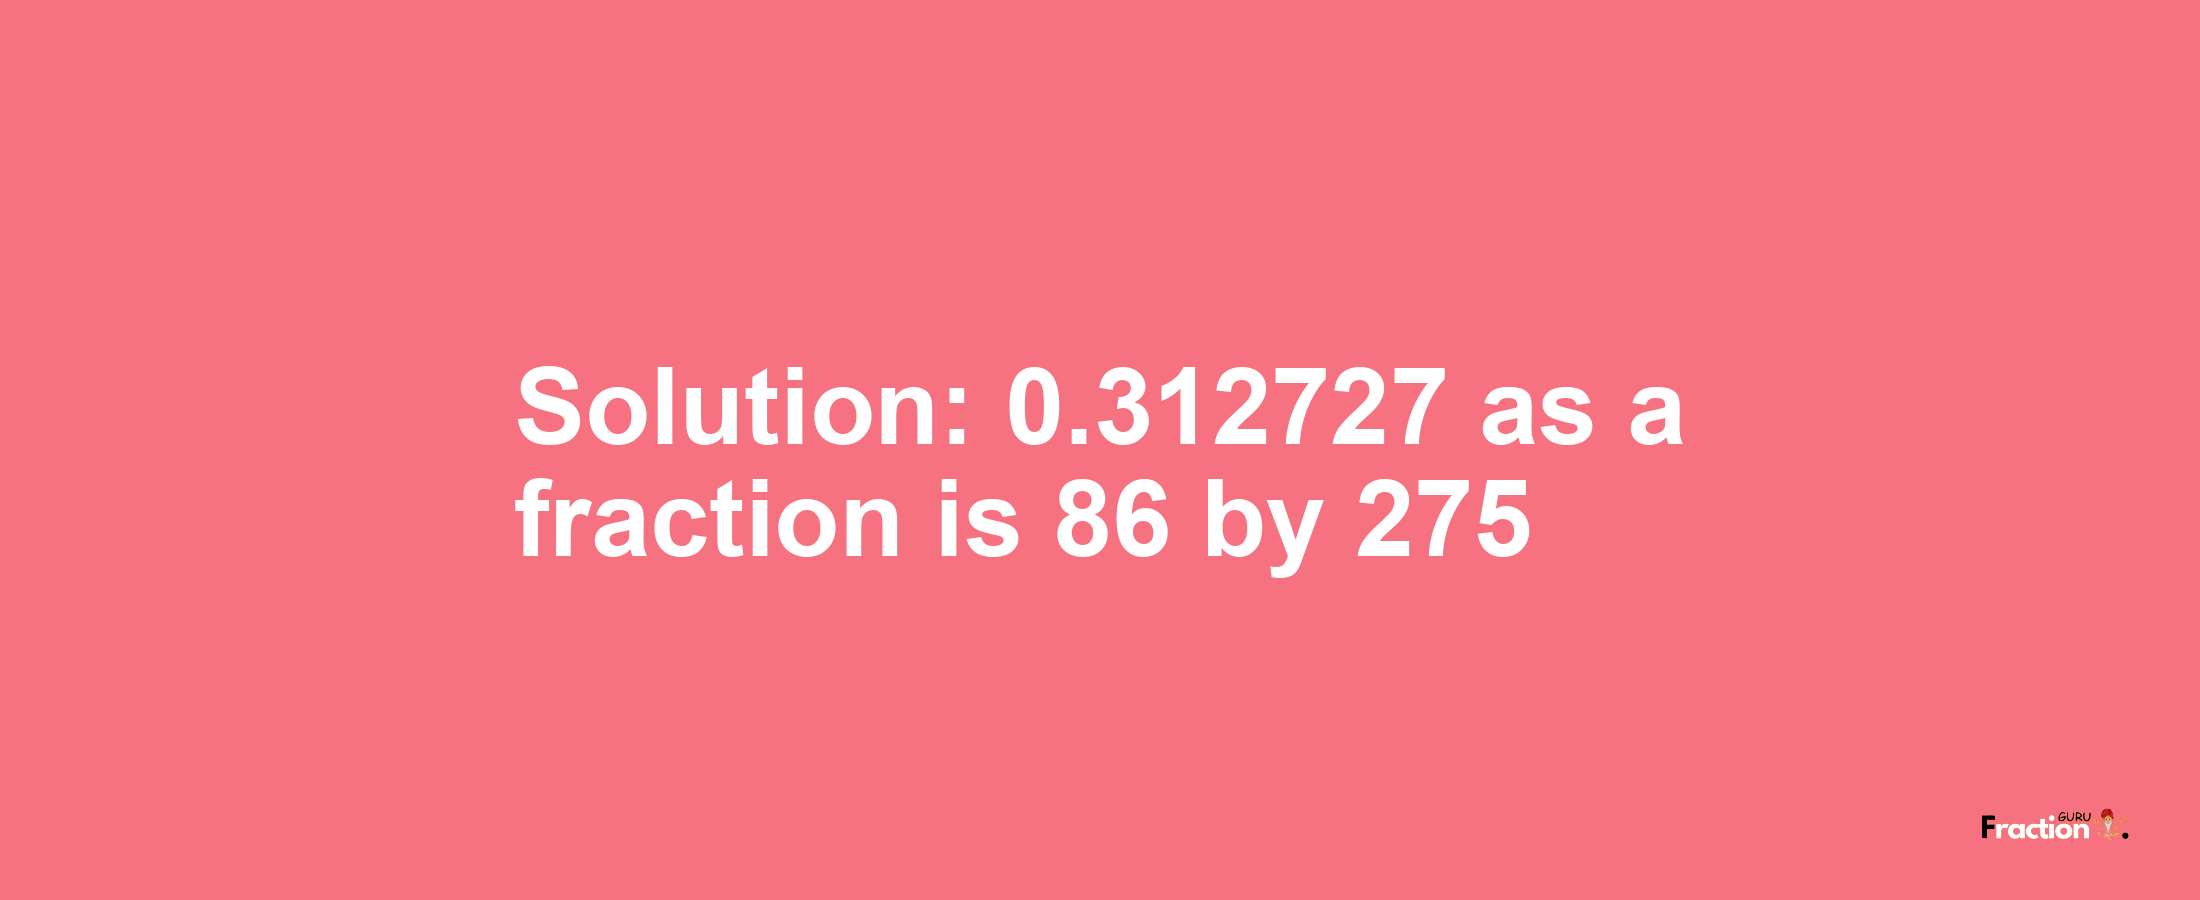 Solution:0.312727 as a fraction is 86/275